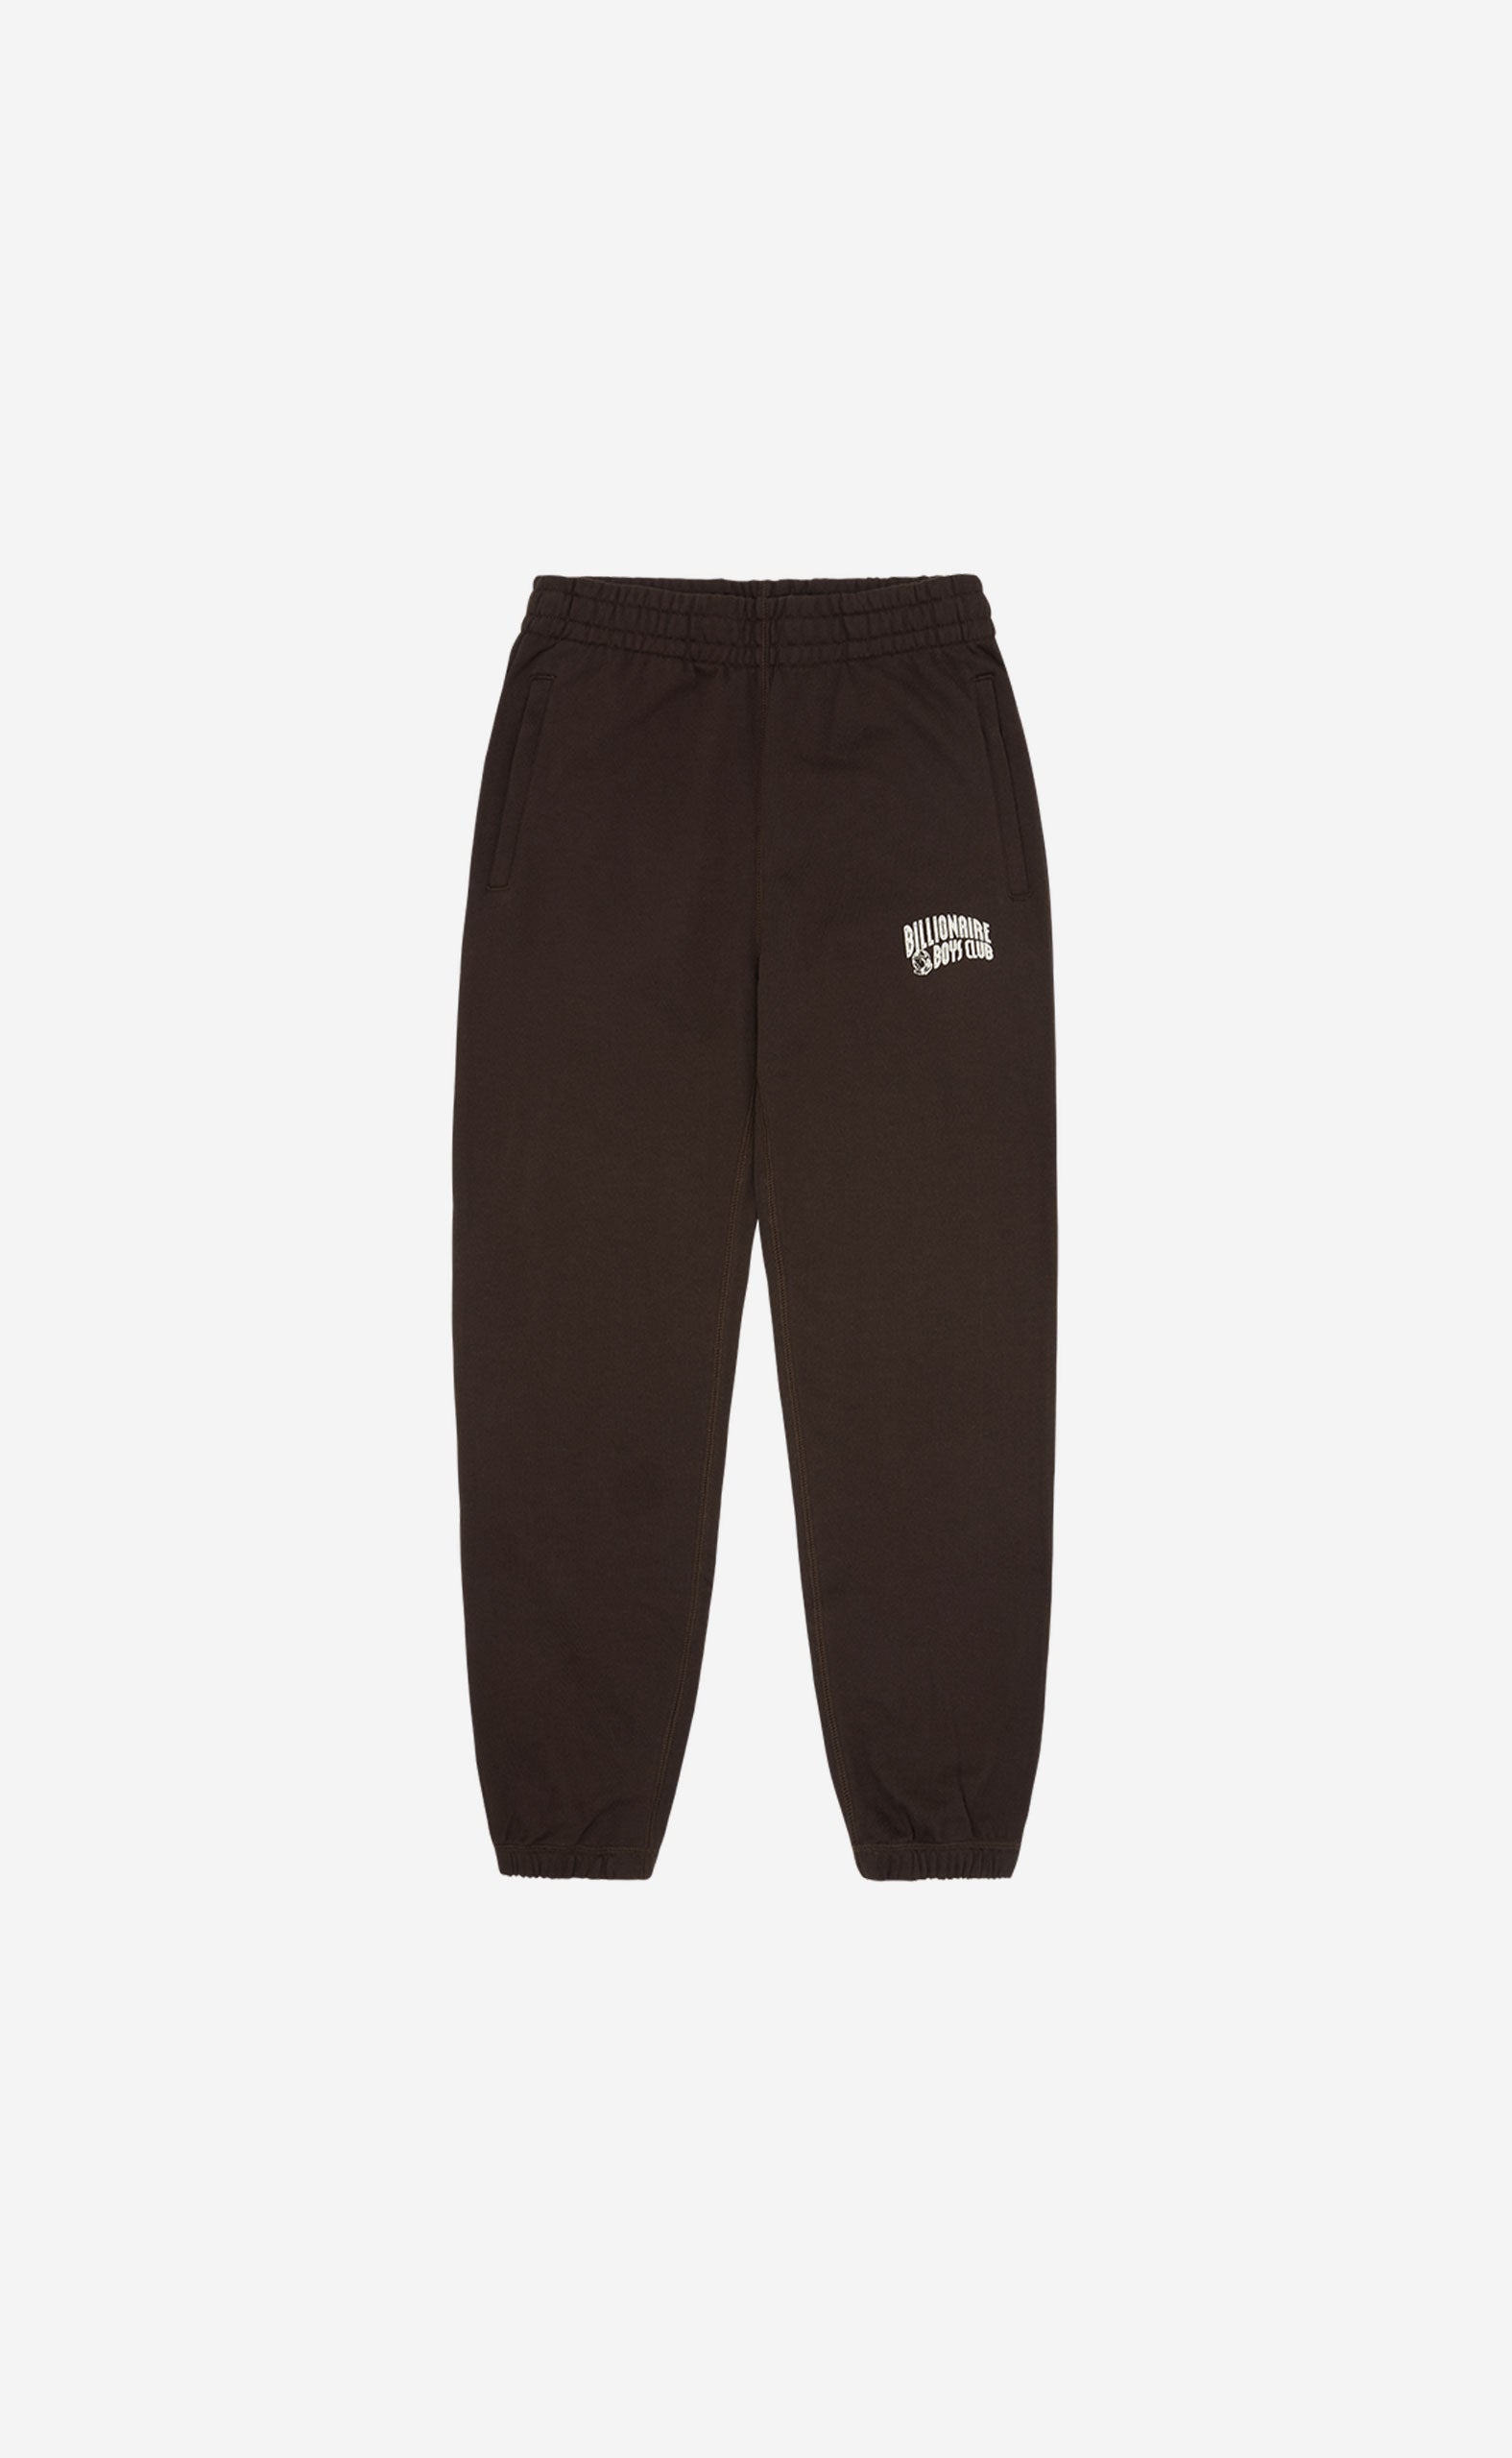 BROWN SMALL ARCH LOGO SWEATPANTS